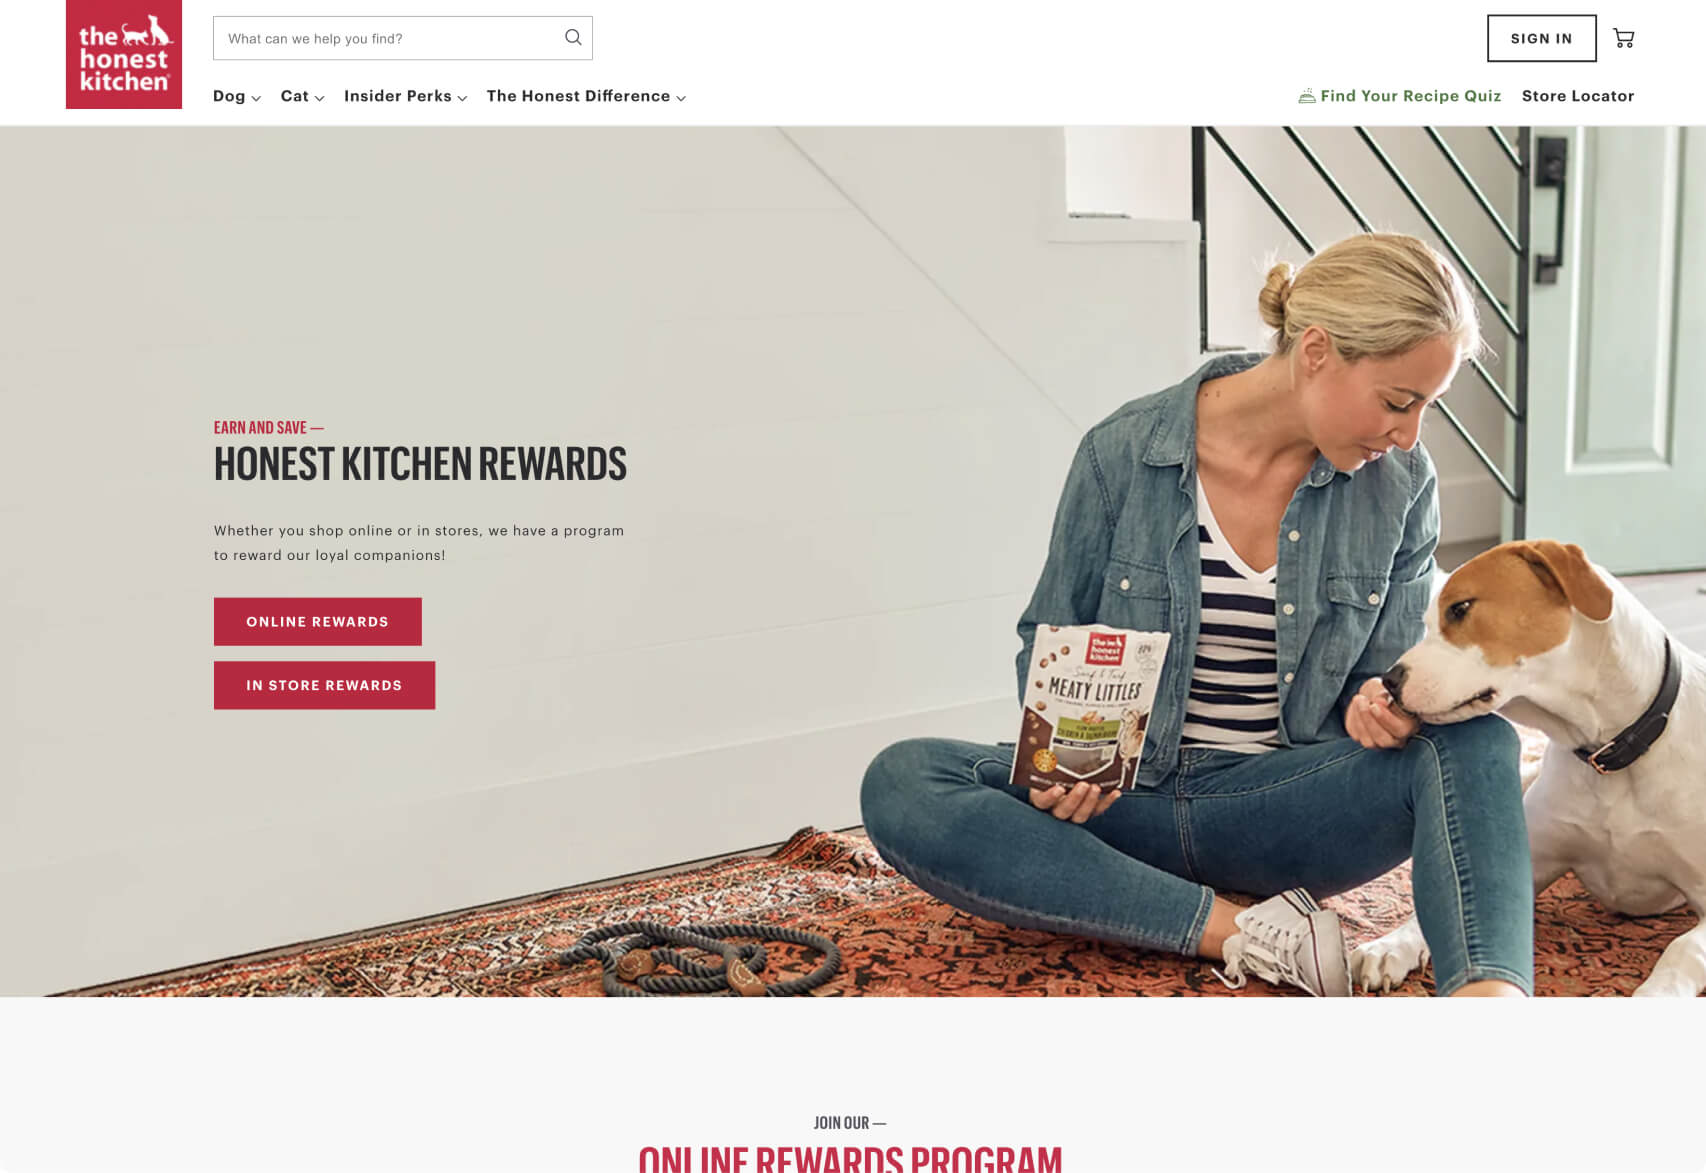 Turn shoppers into members featured image